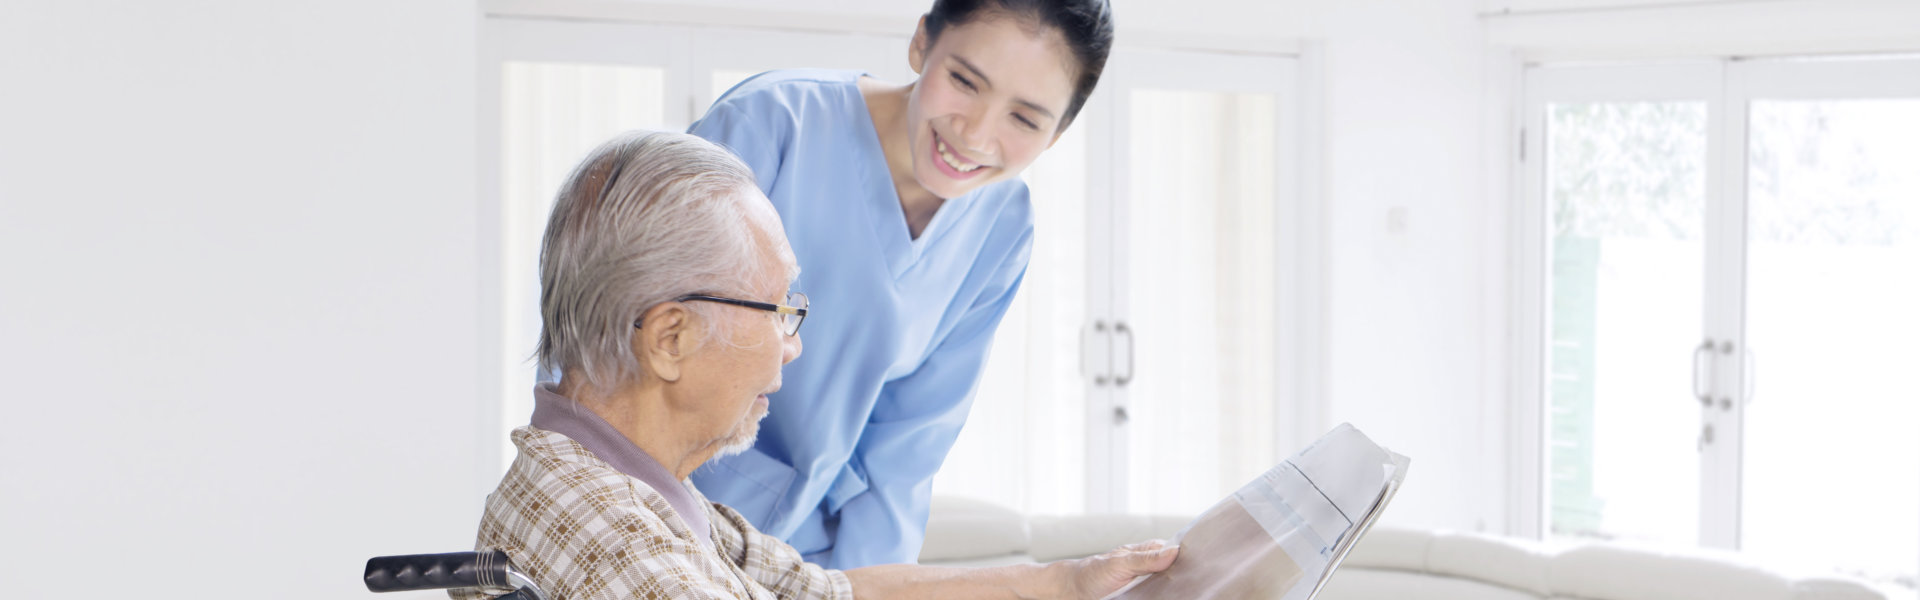 personal care home assistance